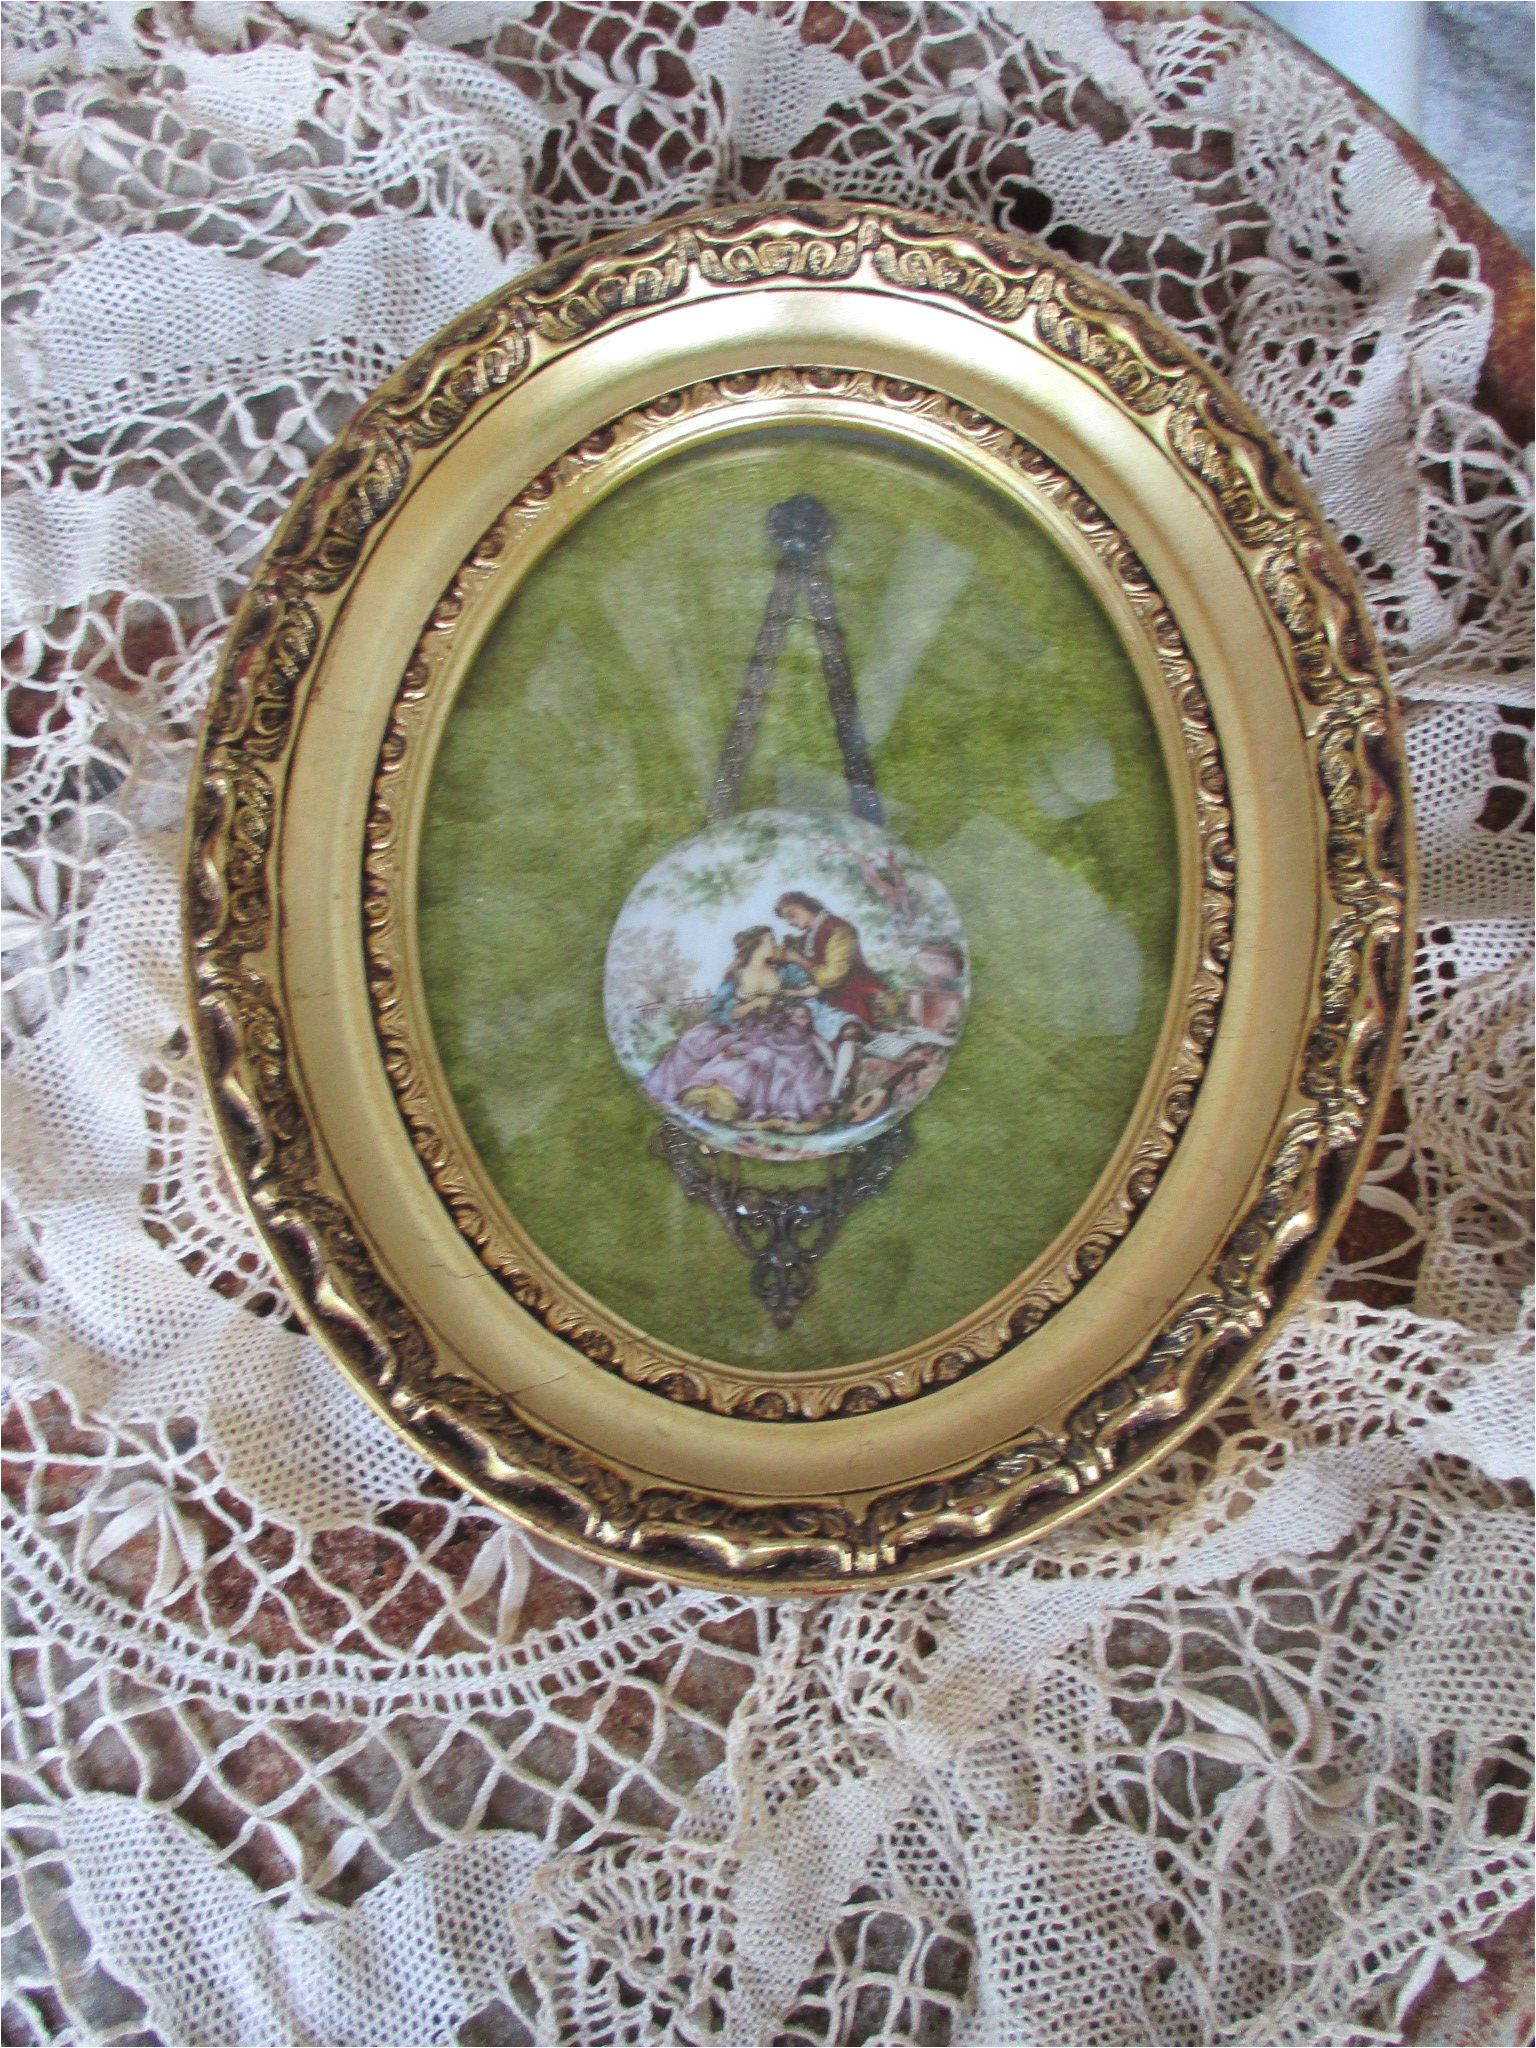 reduced vtg gold gesso framed porcelain fragonard style young lovers garden cameo button on velvet oval convex bubble glass picture frame by